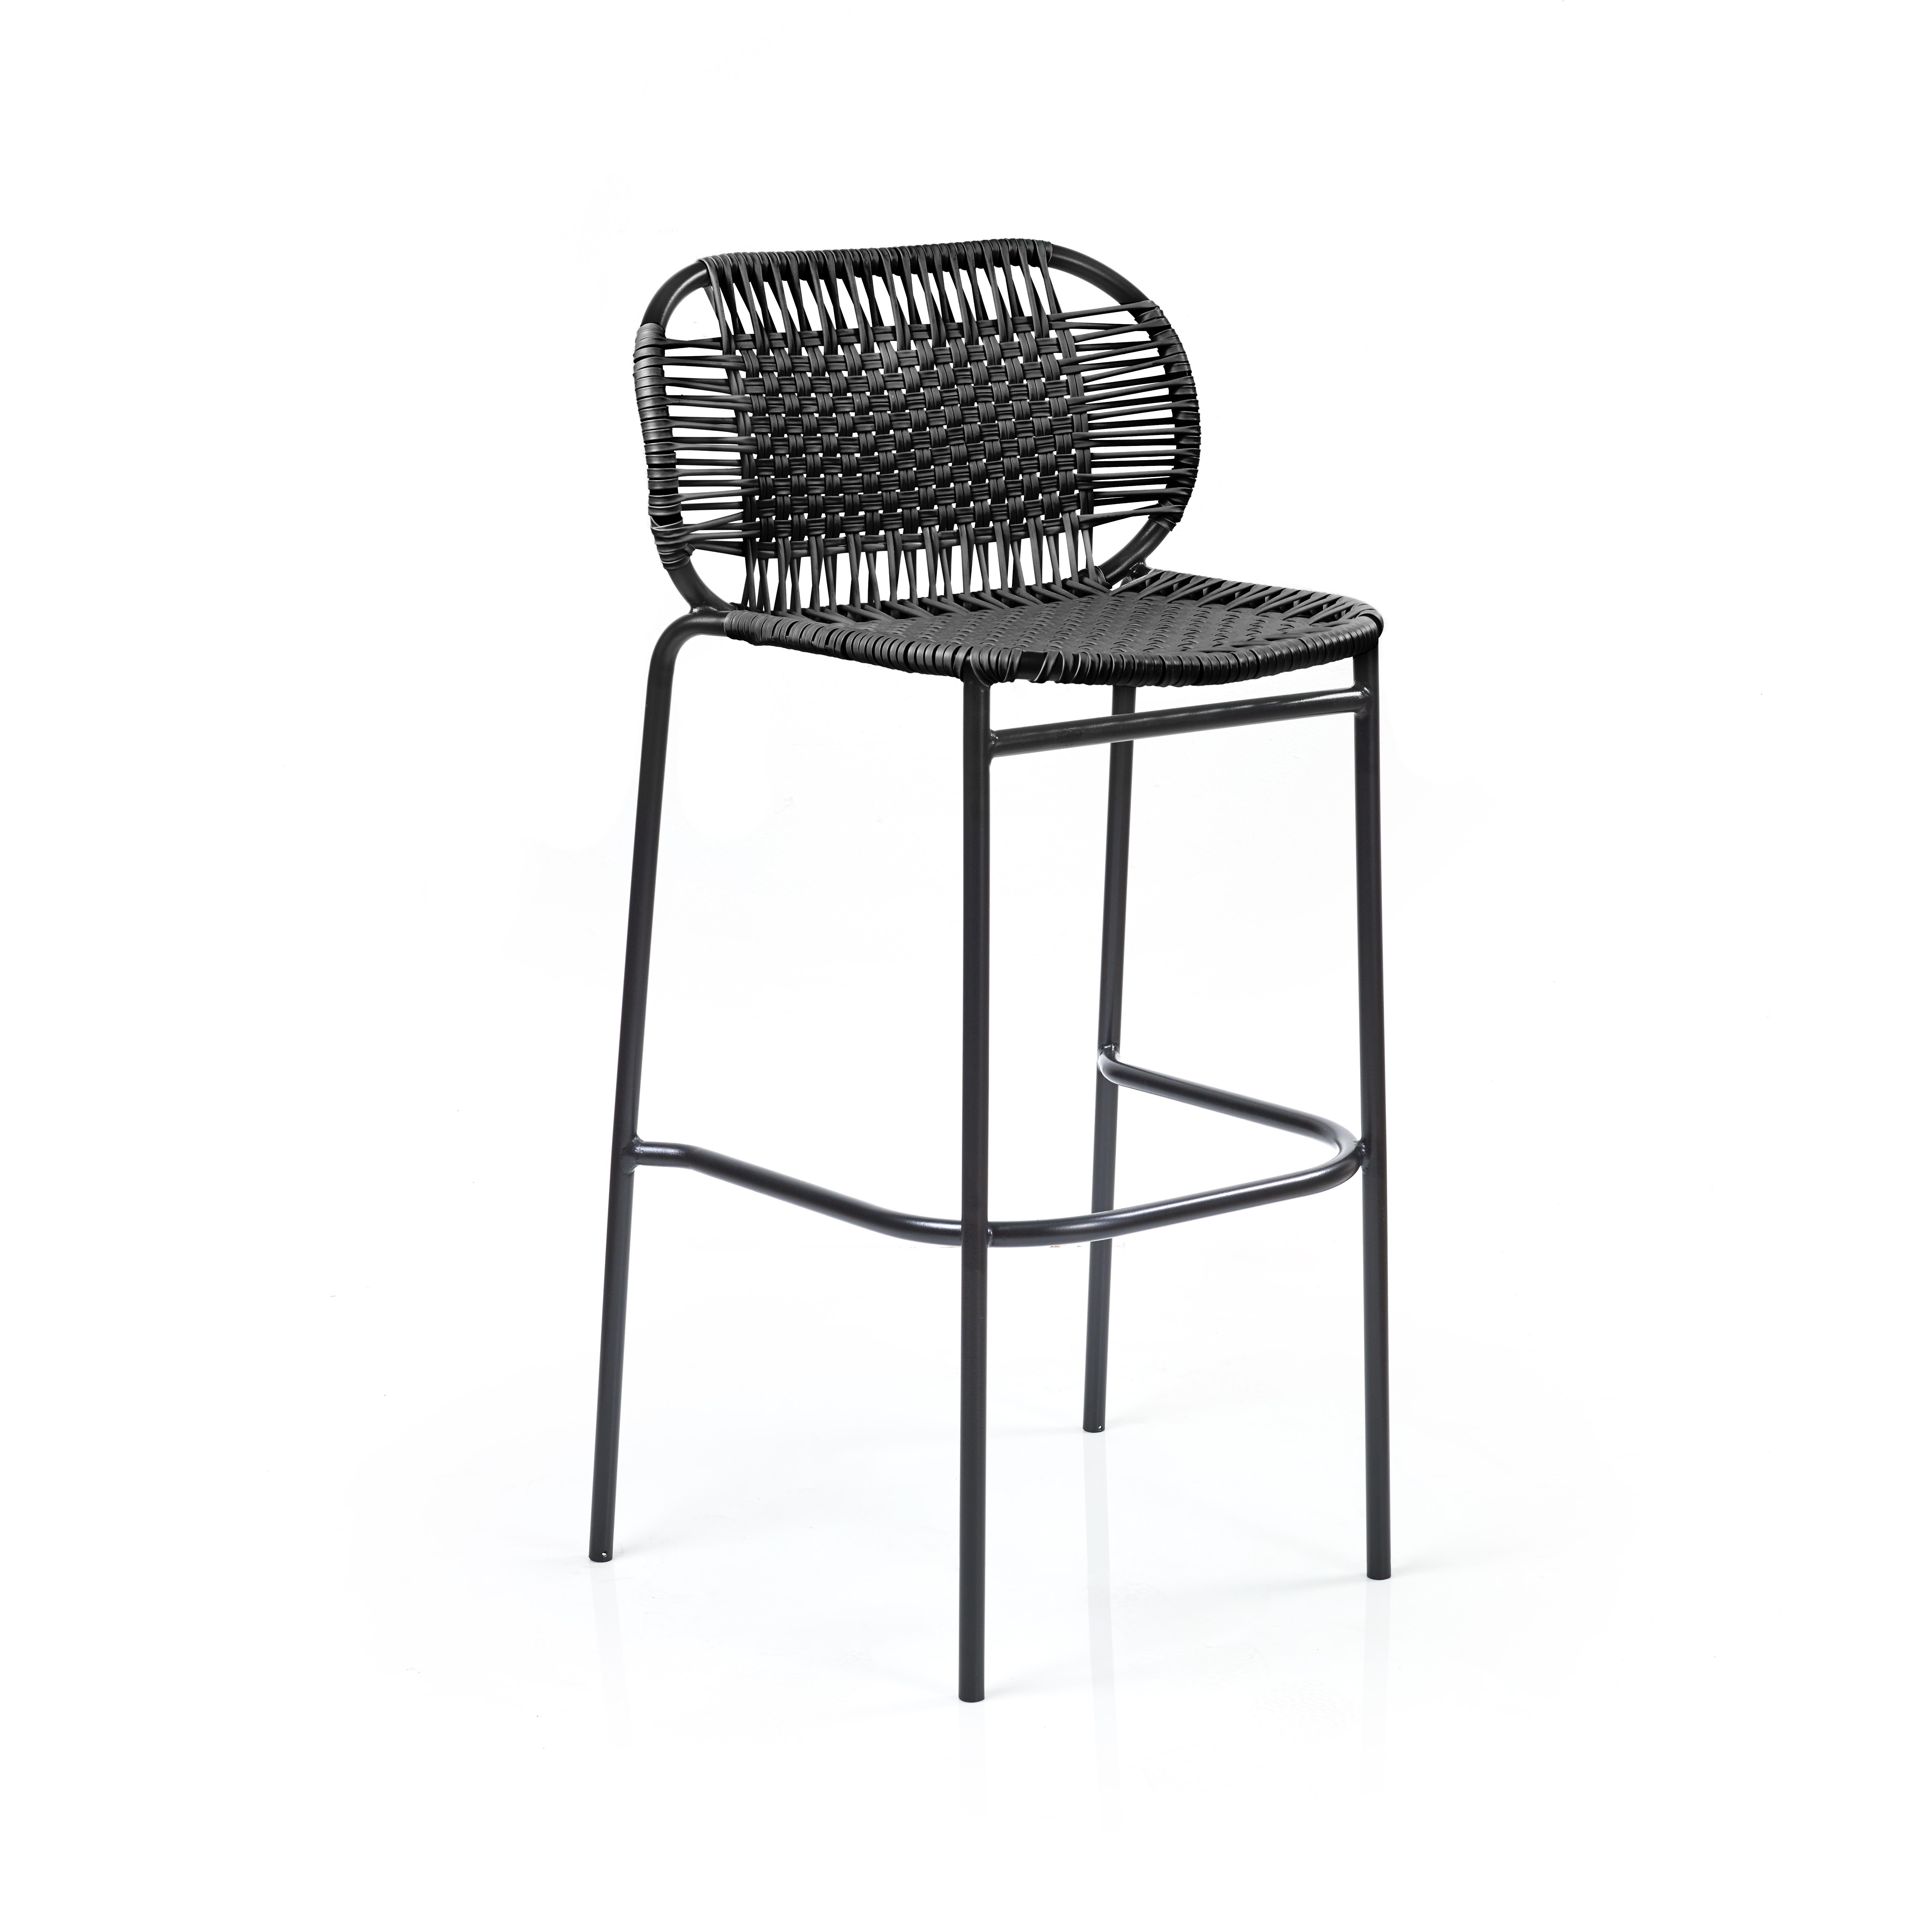 Black Cielo bar stool by Sebastian Herkner
Materials: Galvanized and powder-coated tubular steel. PVC strings are made from recycled plastic.
Technique: Made from recycled plastic and weaved by local craftspeople in Cartagena, Colombia. 
Dimensions: